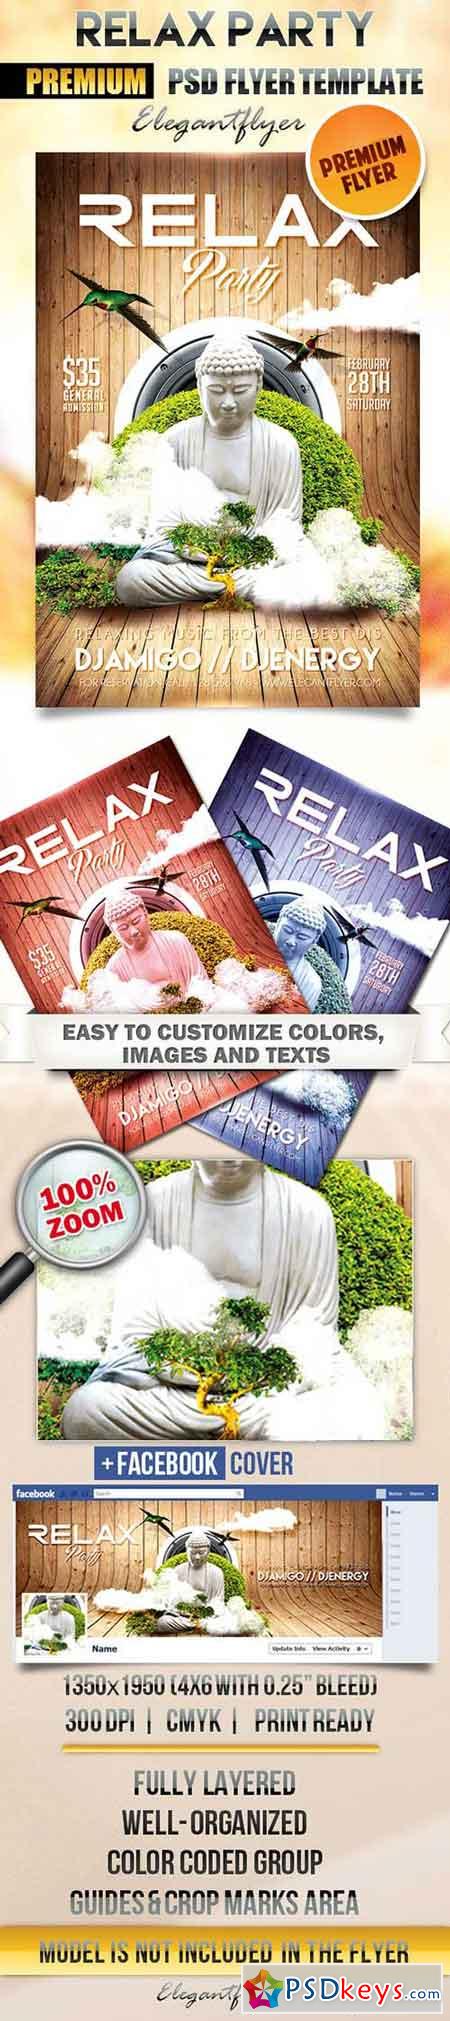 Relax Party Flyer PSD Template + Facebook Cover